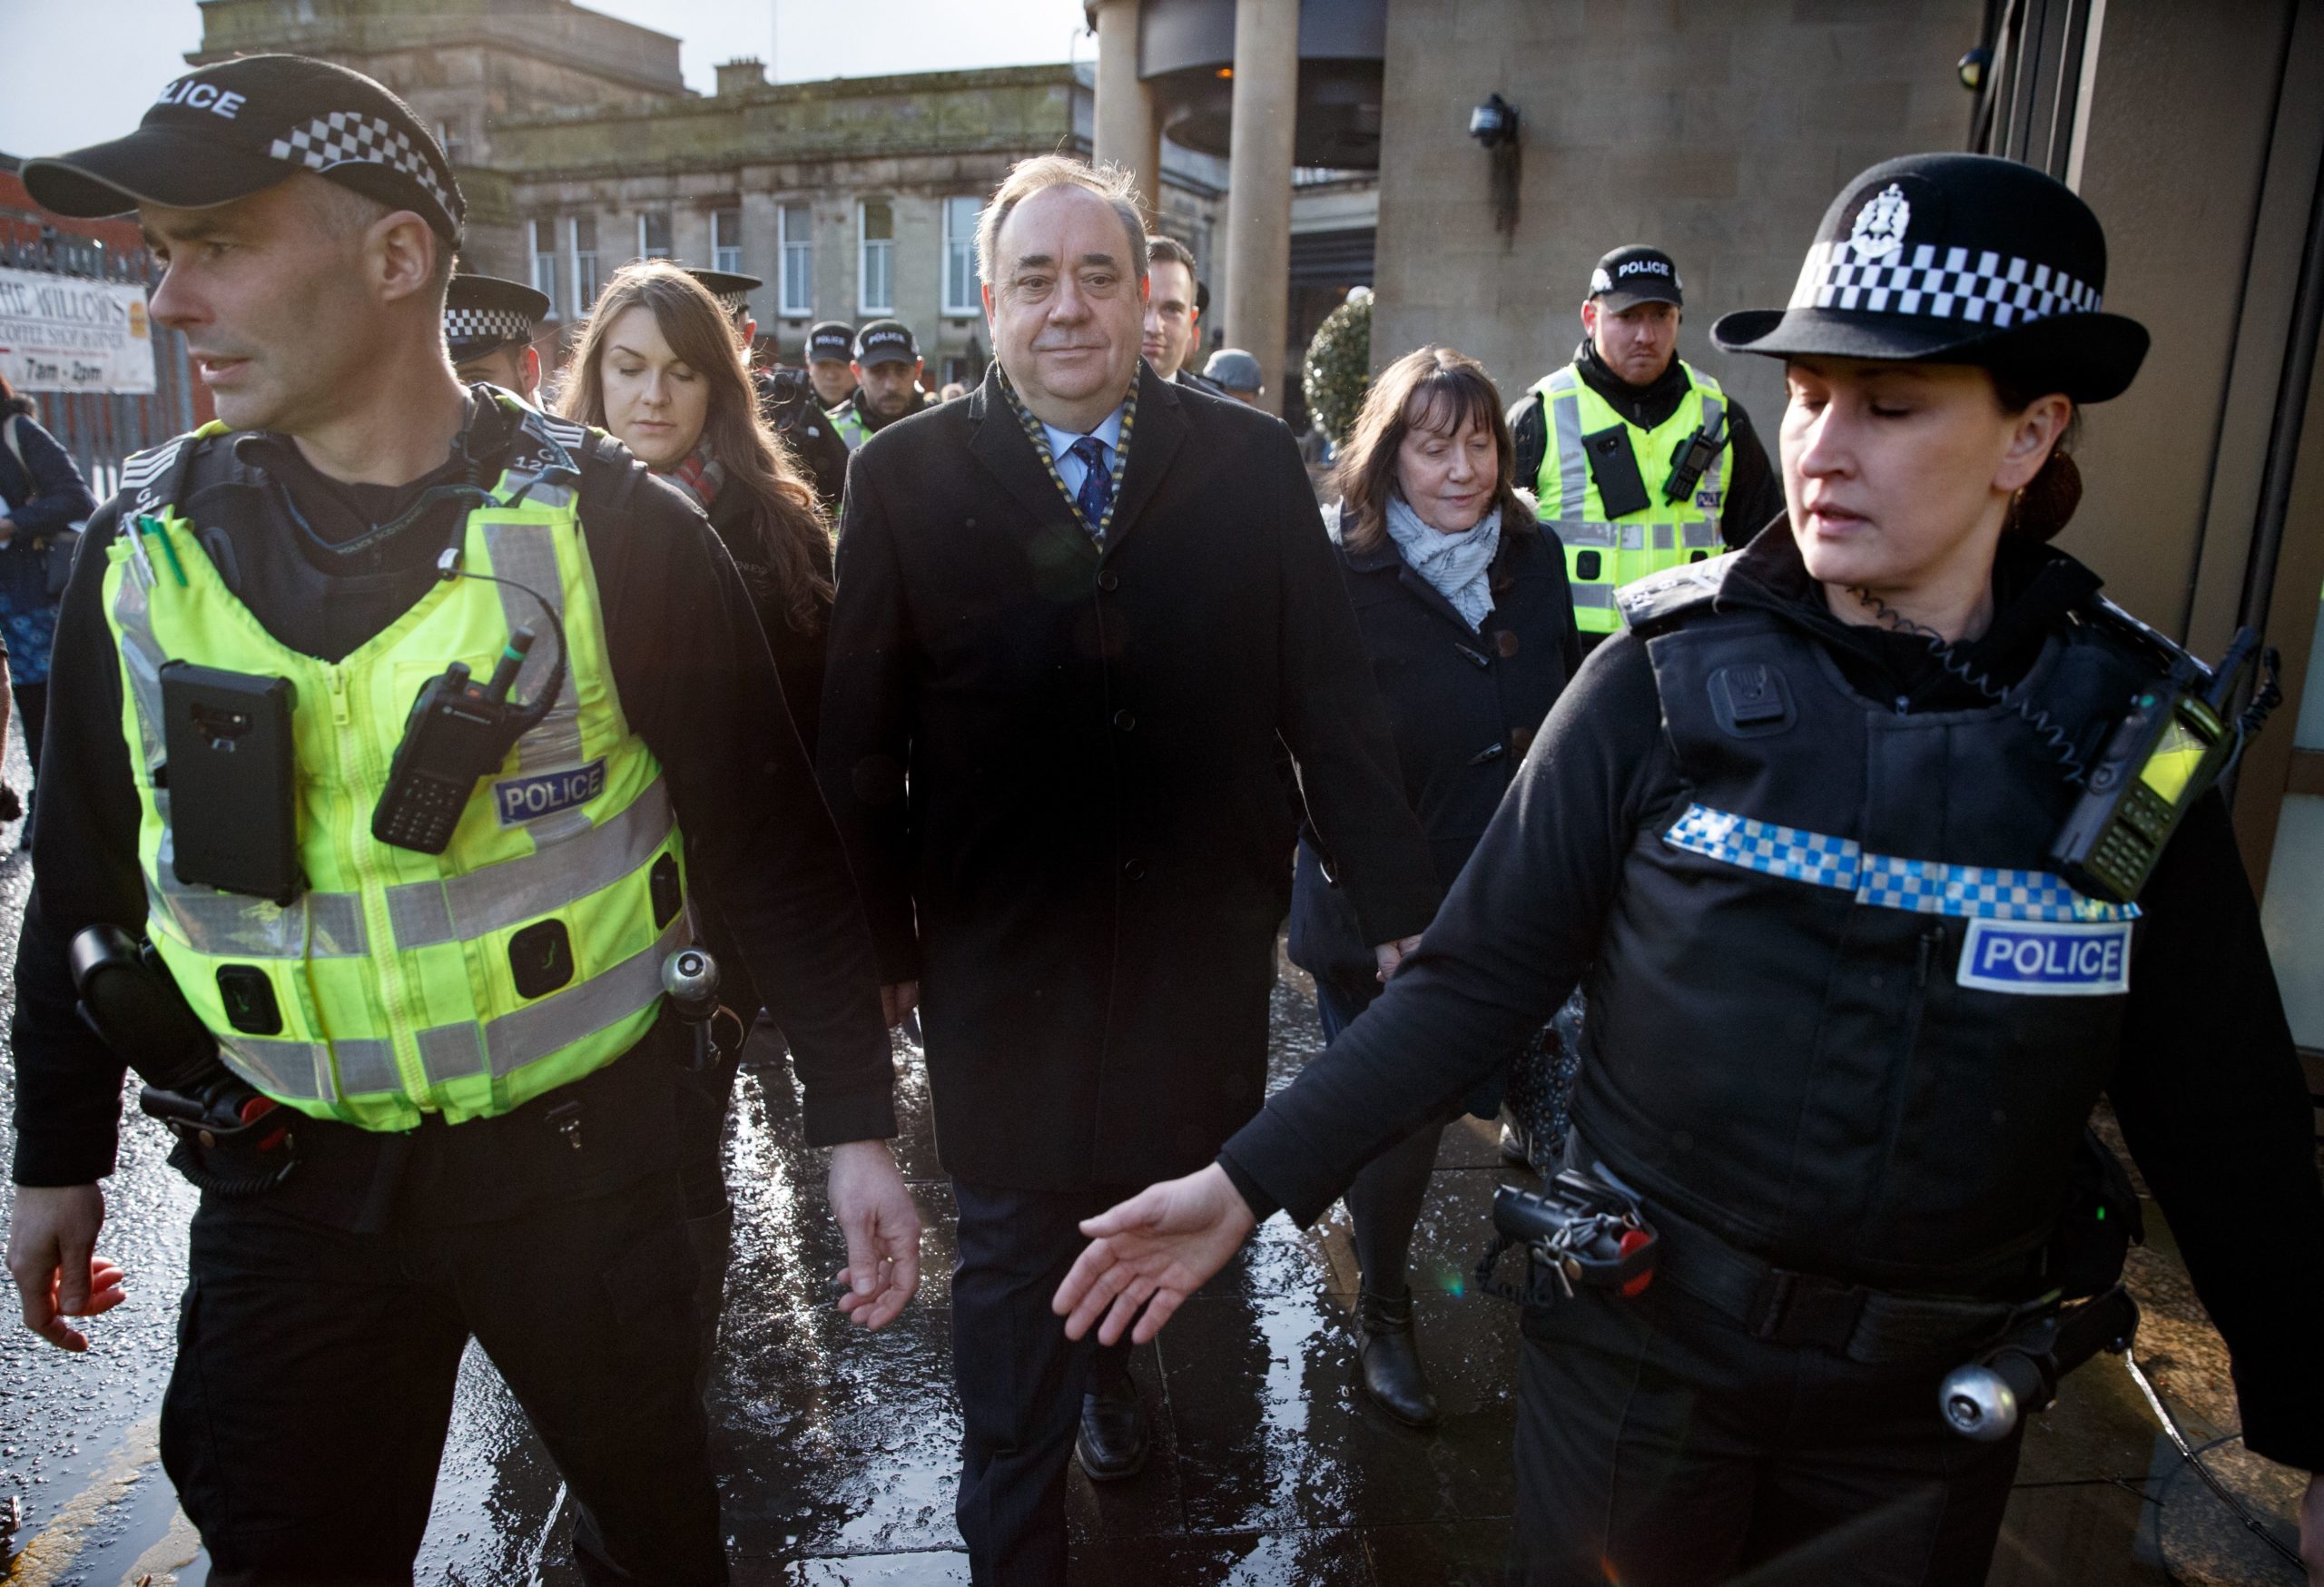 Former First Minister Alex Salmond arrives at the High Court in Edinburgh with a police escort as the trial over attempted rape and sexual assault charges begins. He denies all the charges